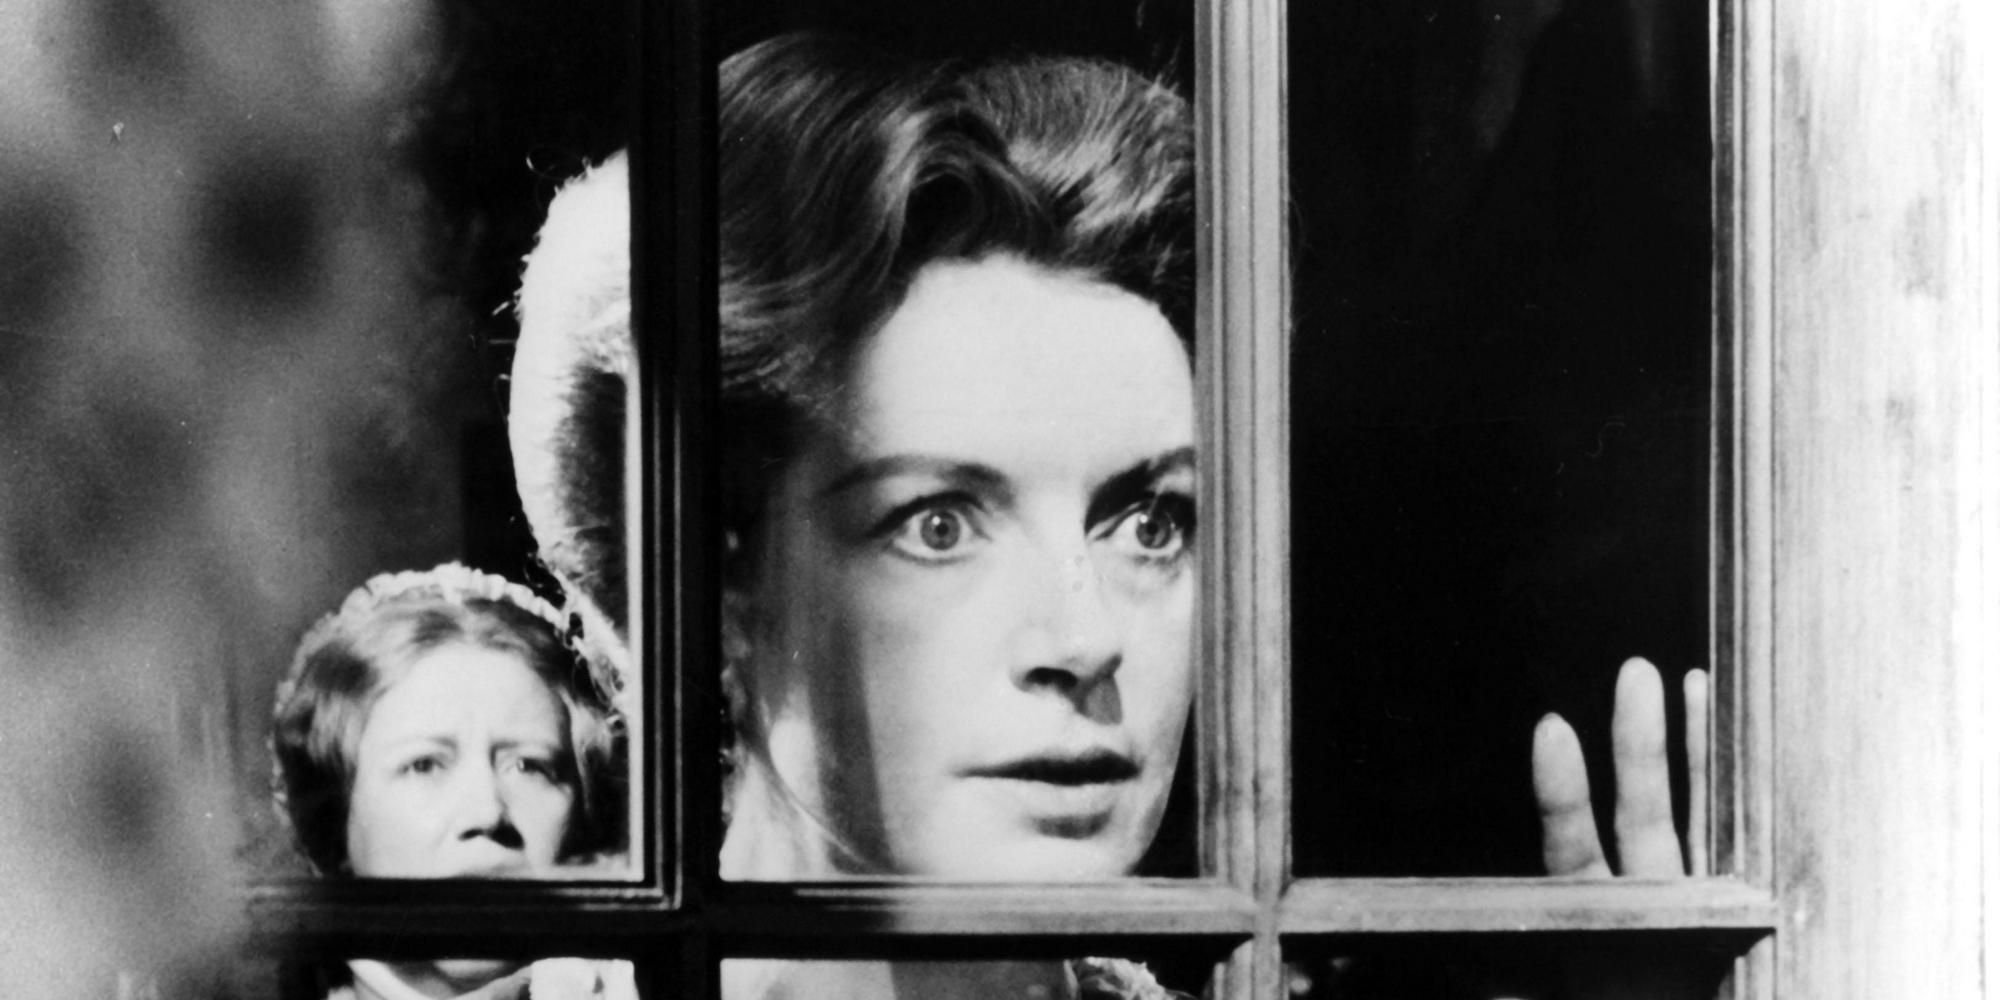 The governess looking out the window in 'The Innocents'